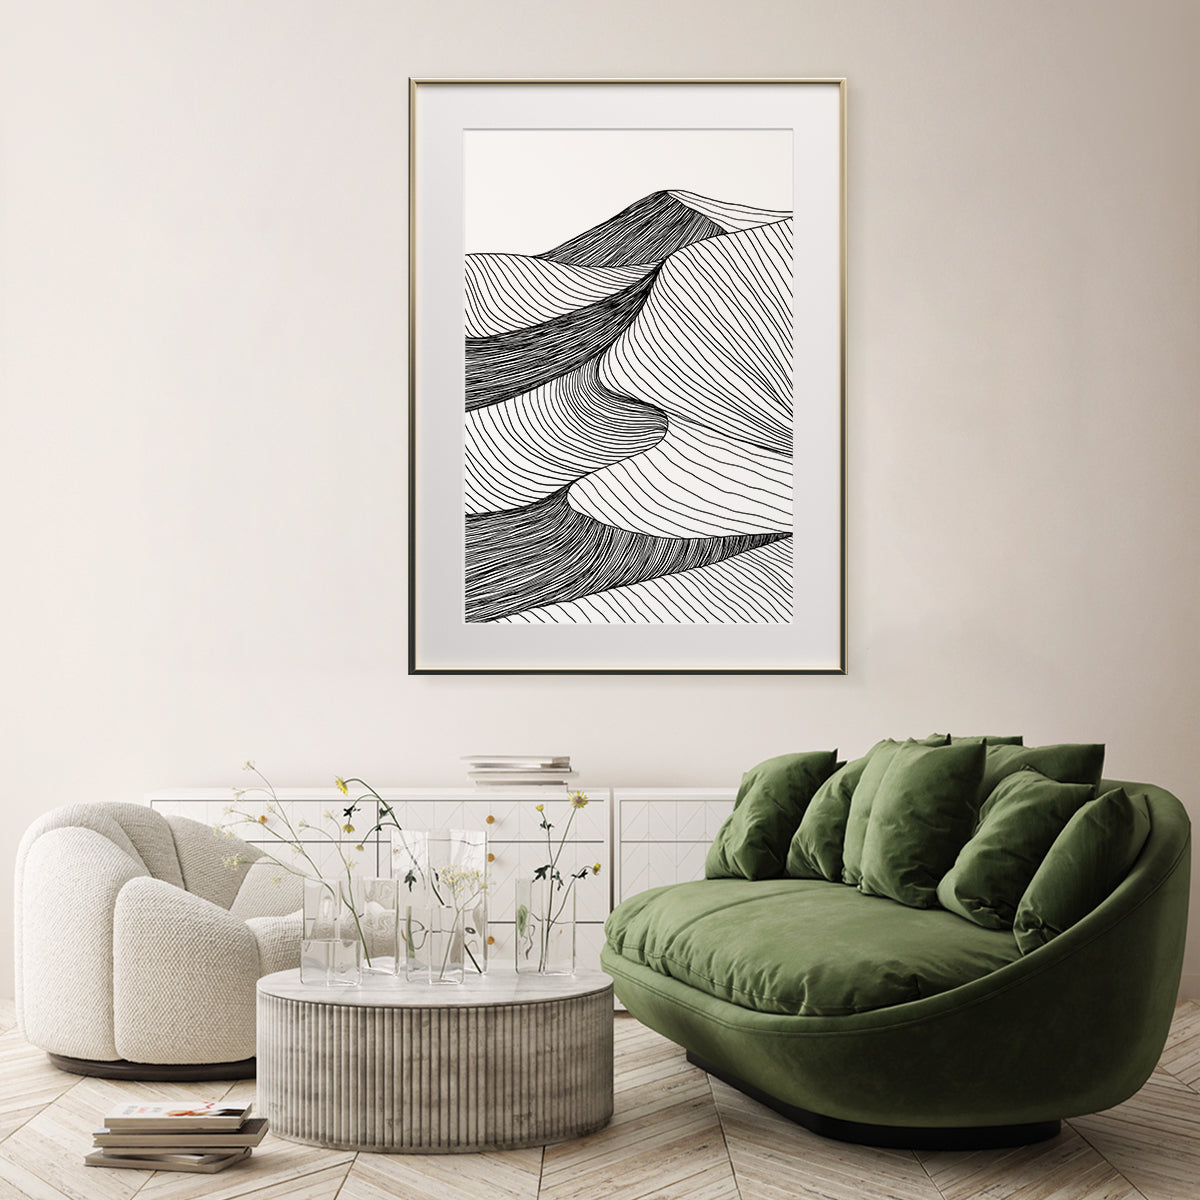 Abstract Black and White Mountain Landscape Posters Decor-Vertical Posters NOT FRAMED-CetArt-8″x10″ inches-CetArt